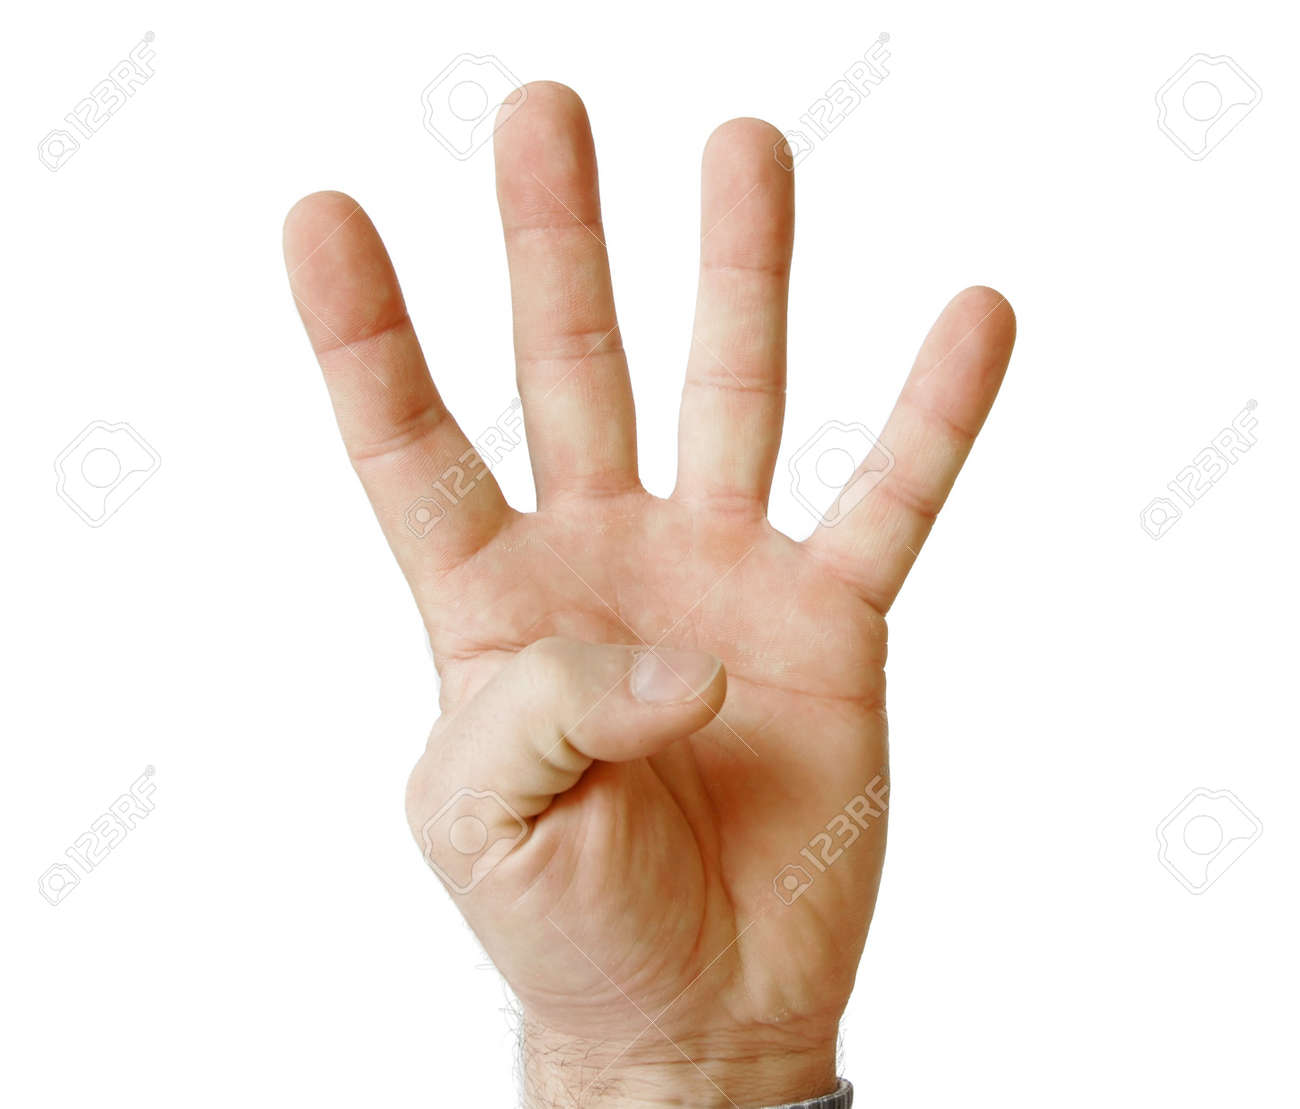 4572302-human-palm-hand-showing-four-fingers-isolated-on-white.jpg